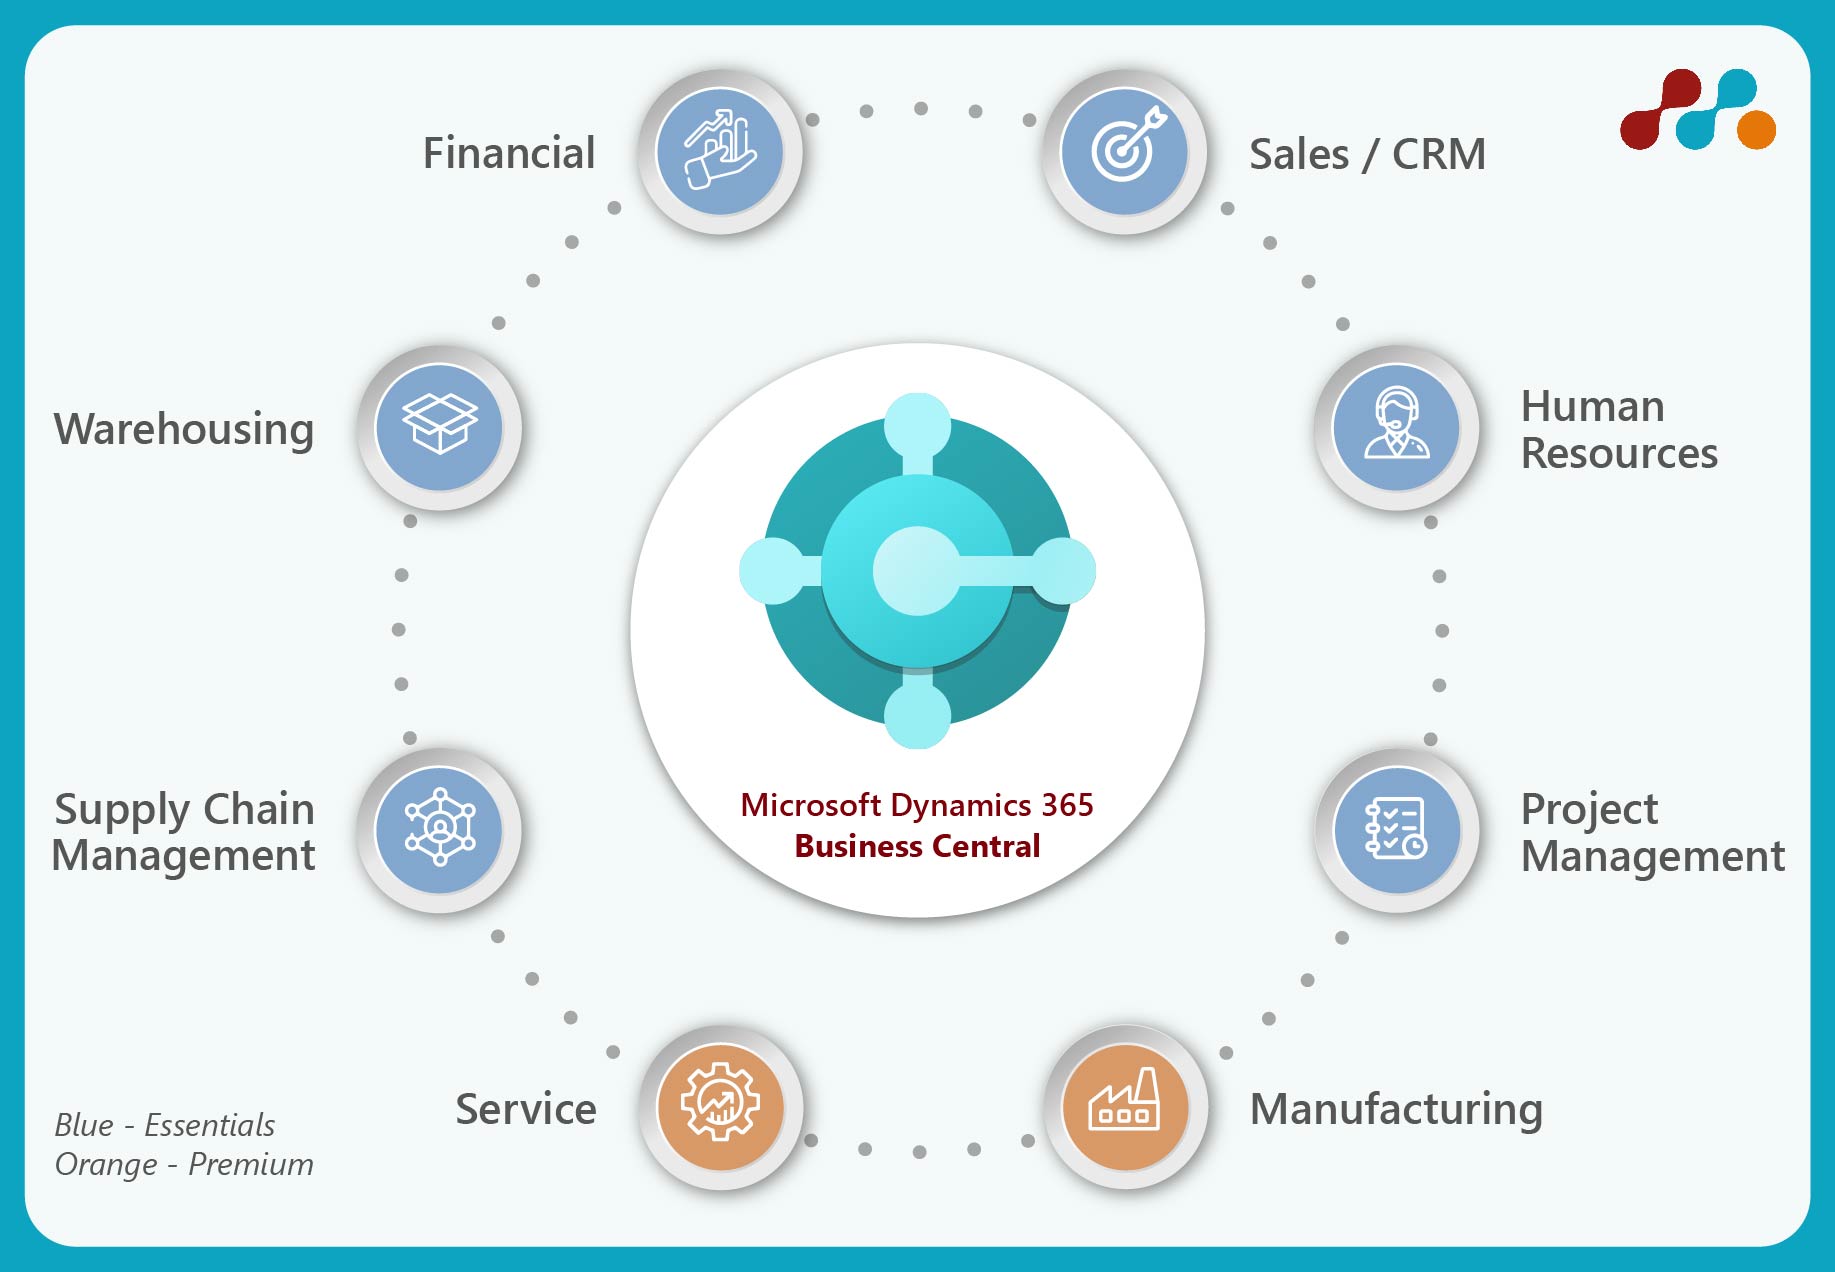 Why Manufacturers Should Choose Dynamics 365 Business Central